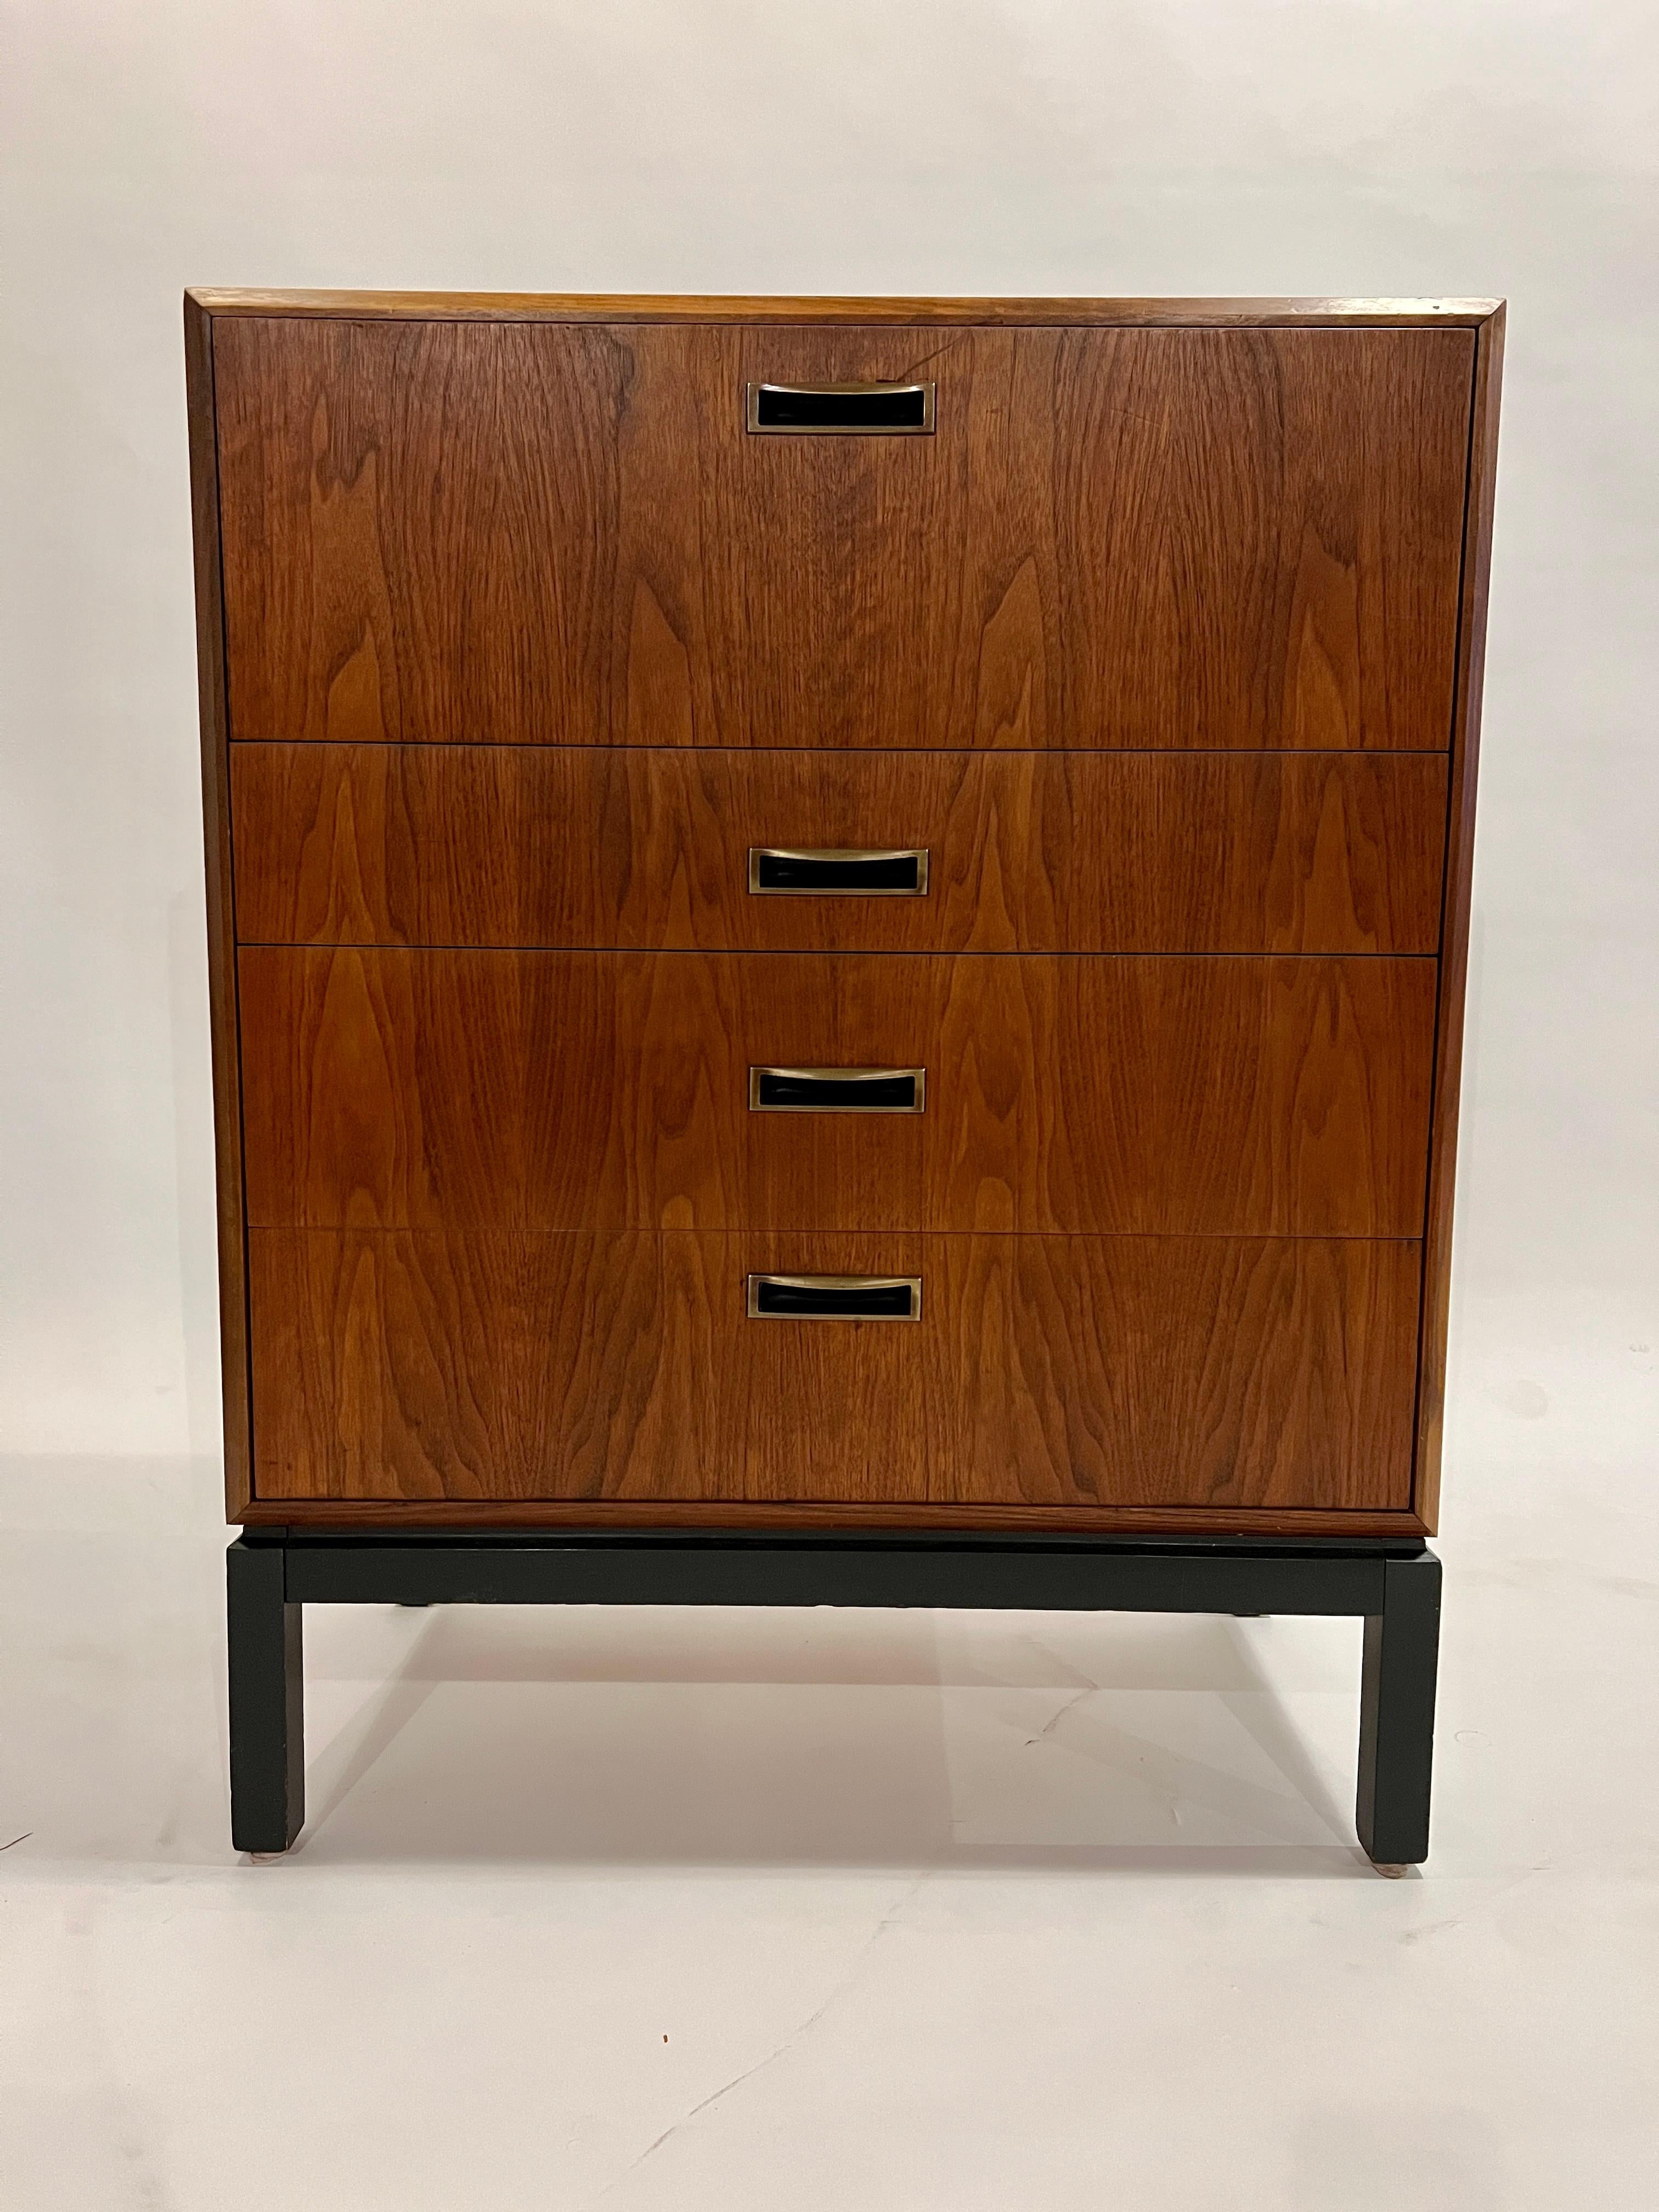 Midcentury walnut tall dresser with a pullout secretary and three lower drawers designed by Jack Cartwright for Founders Furniture Co. This highly functional and truly versatile case good can be used in a variety of spaces including a bedroom,